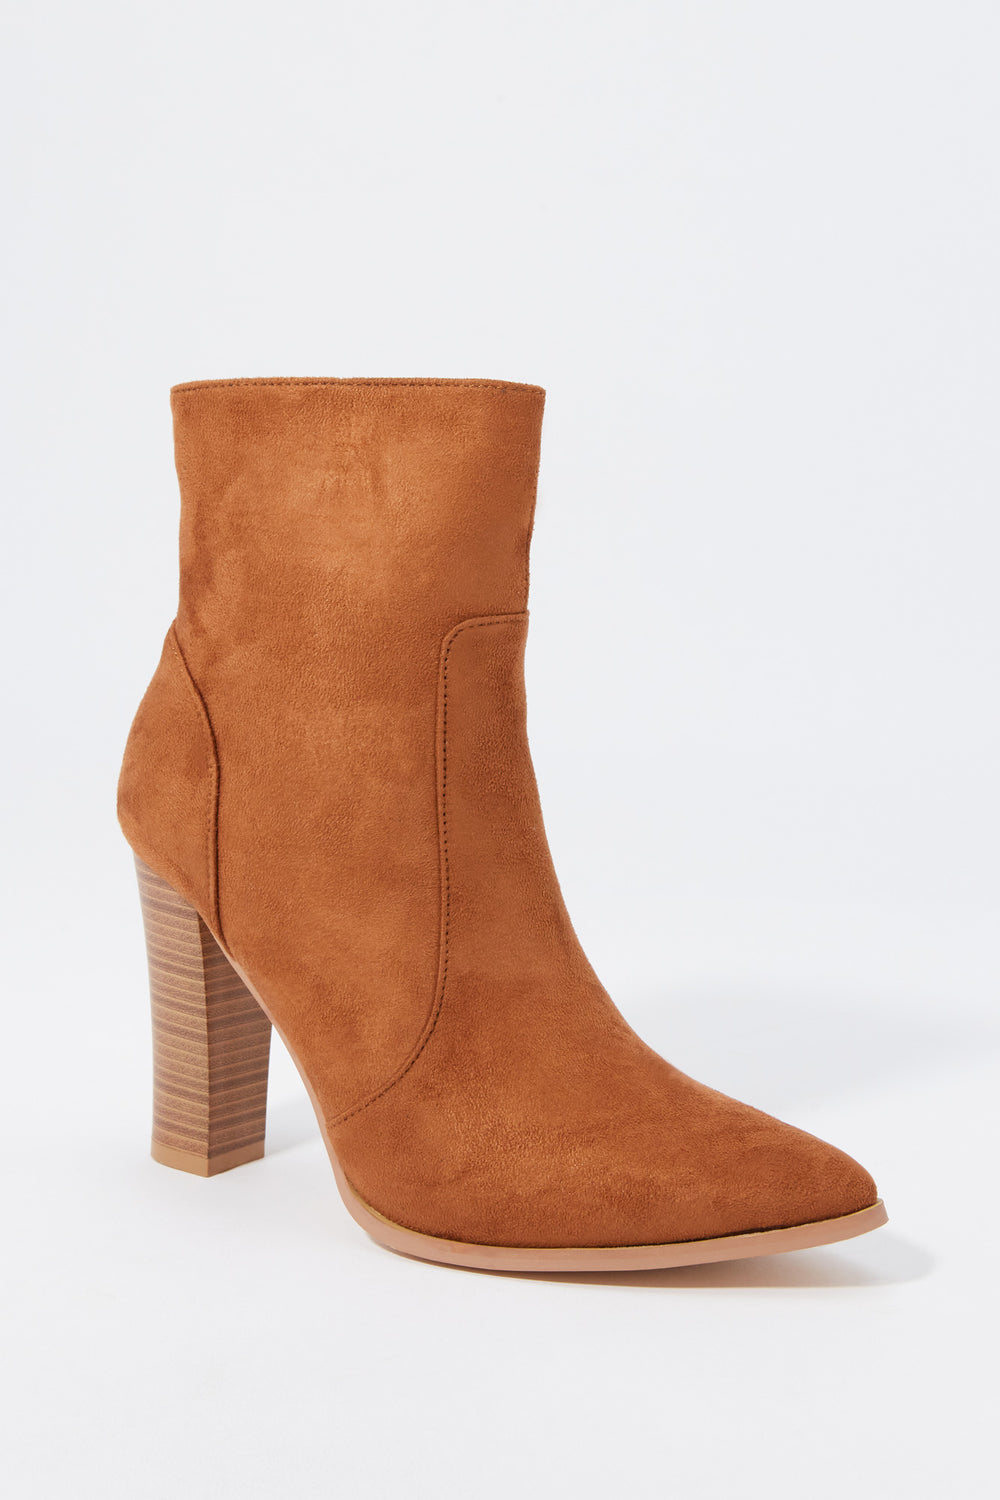 Faux-Suede Pointed Toe Platform Boot Faux-Suede Pointed Toe Platform Boot 2